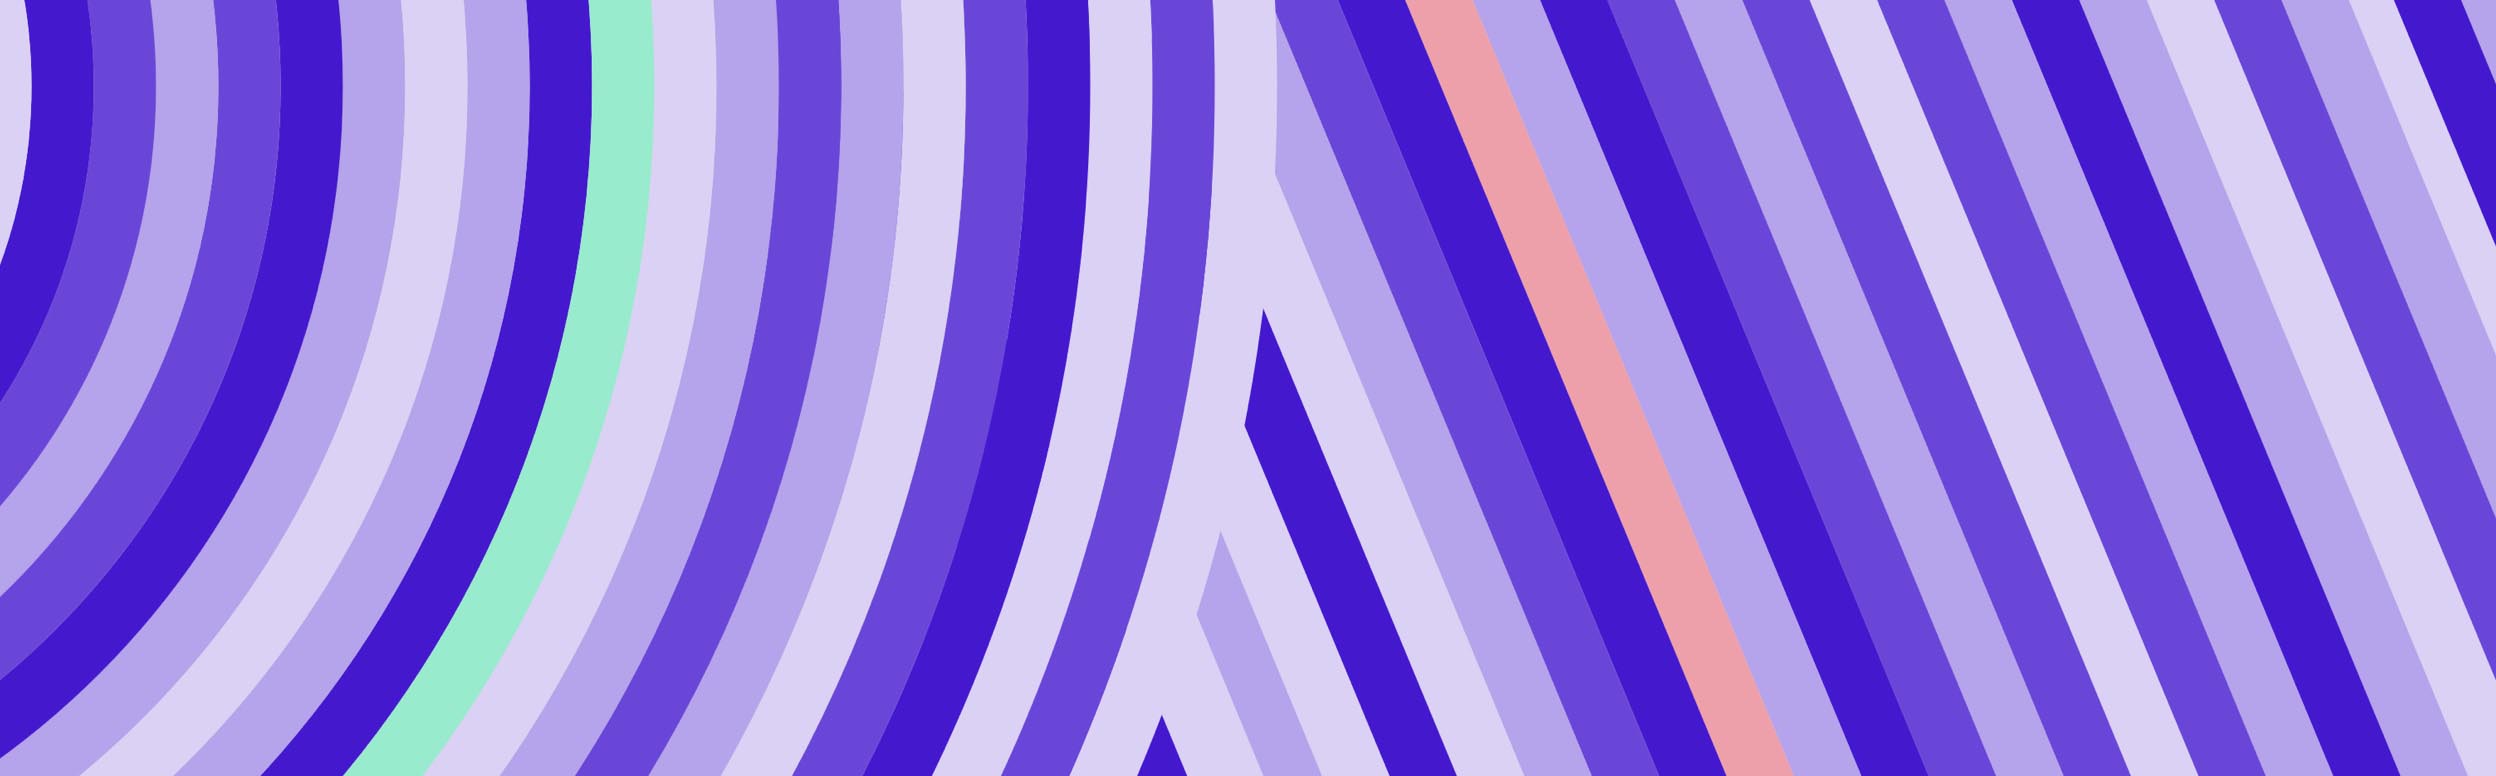 Get The Best Violet Striped GFX Background For Your Creativity